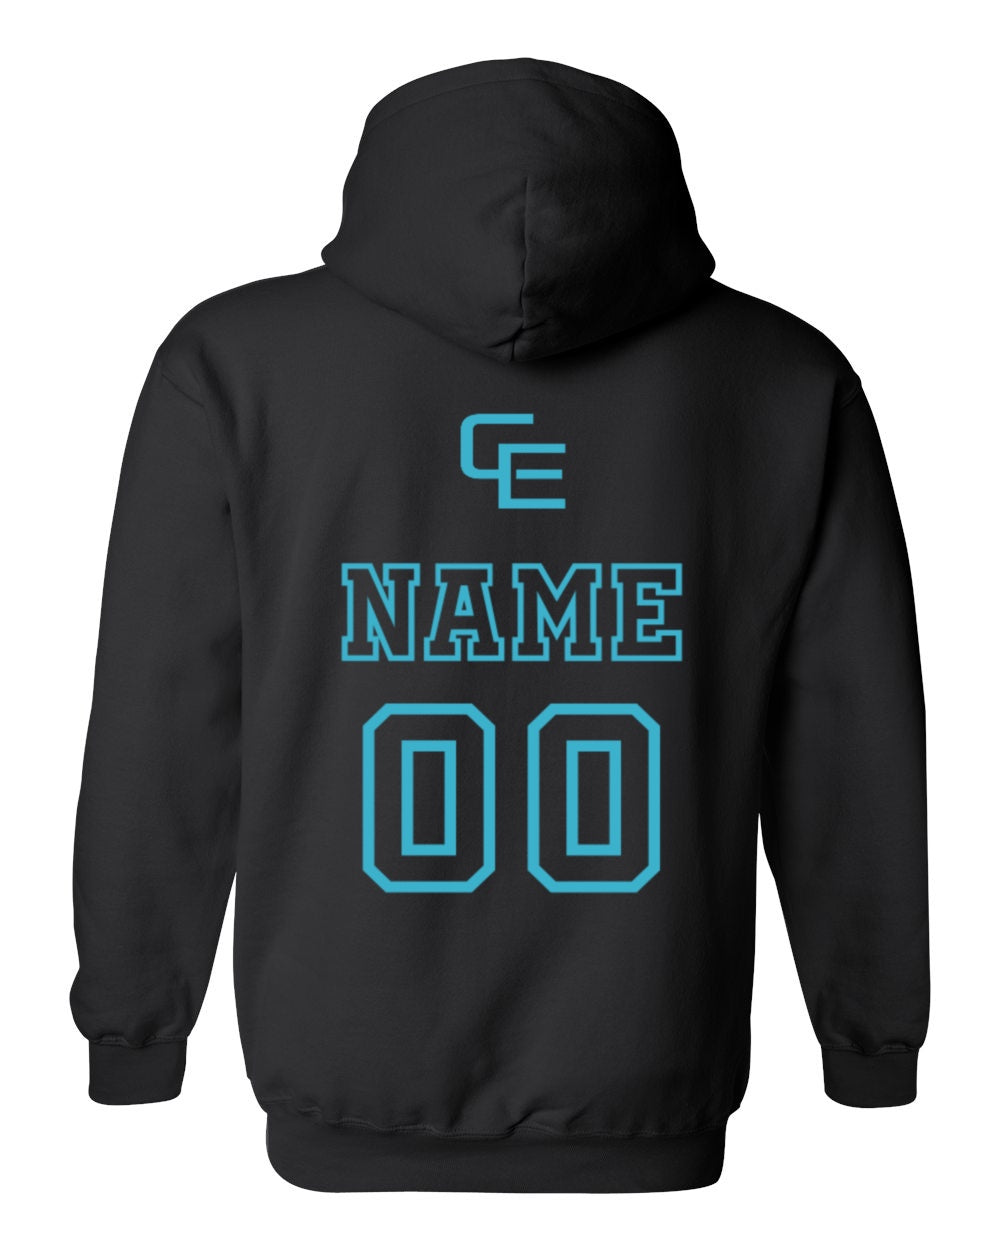 The Outfield Hoodie